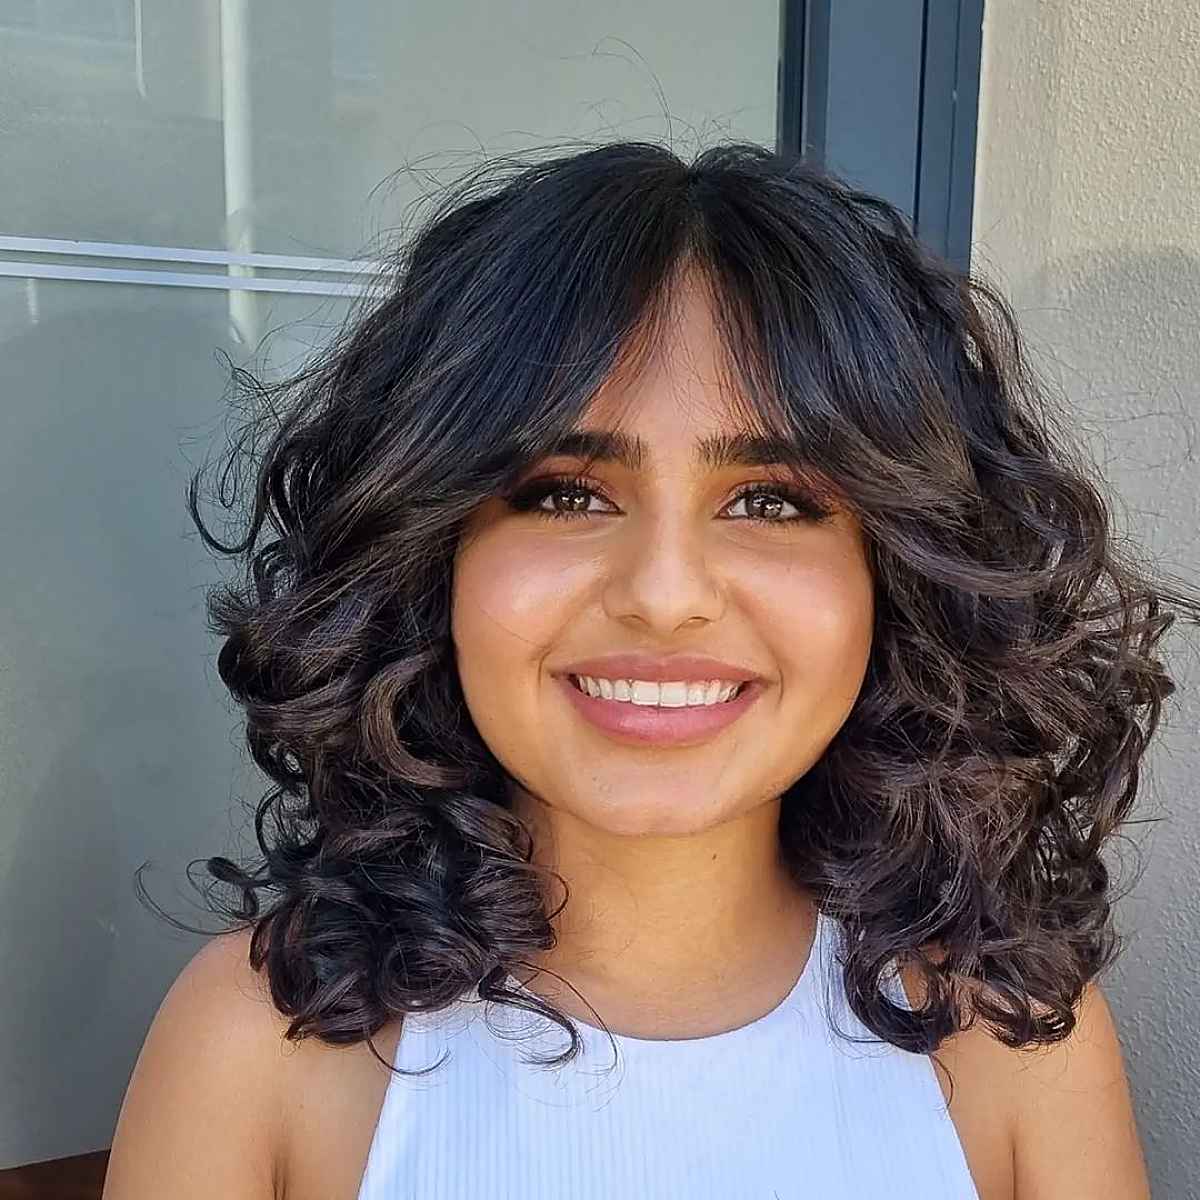 Shoulder-Length Wavy Curls with curtain bangs for a Round Face